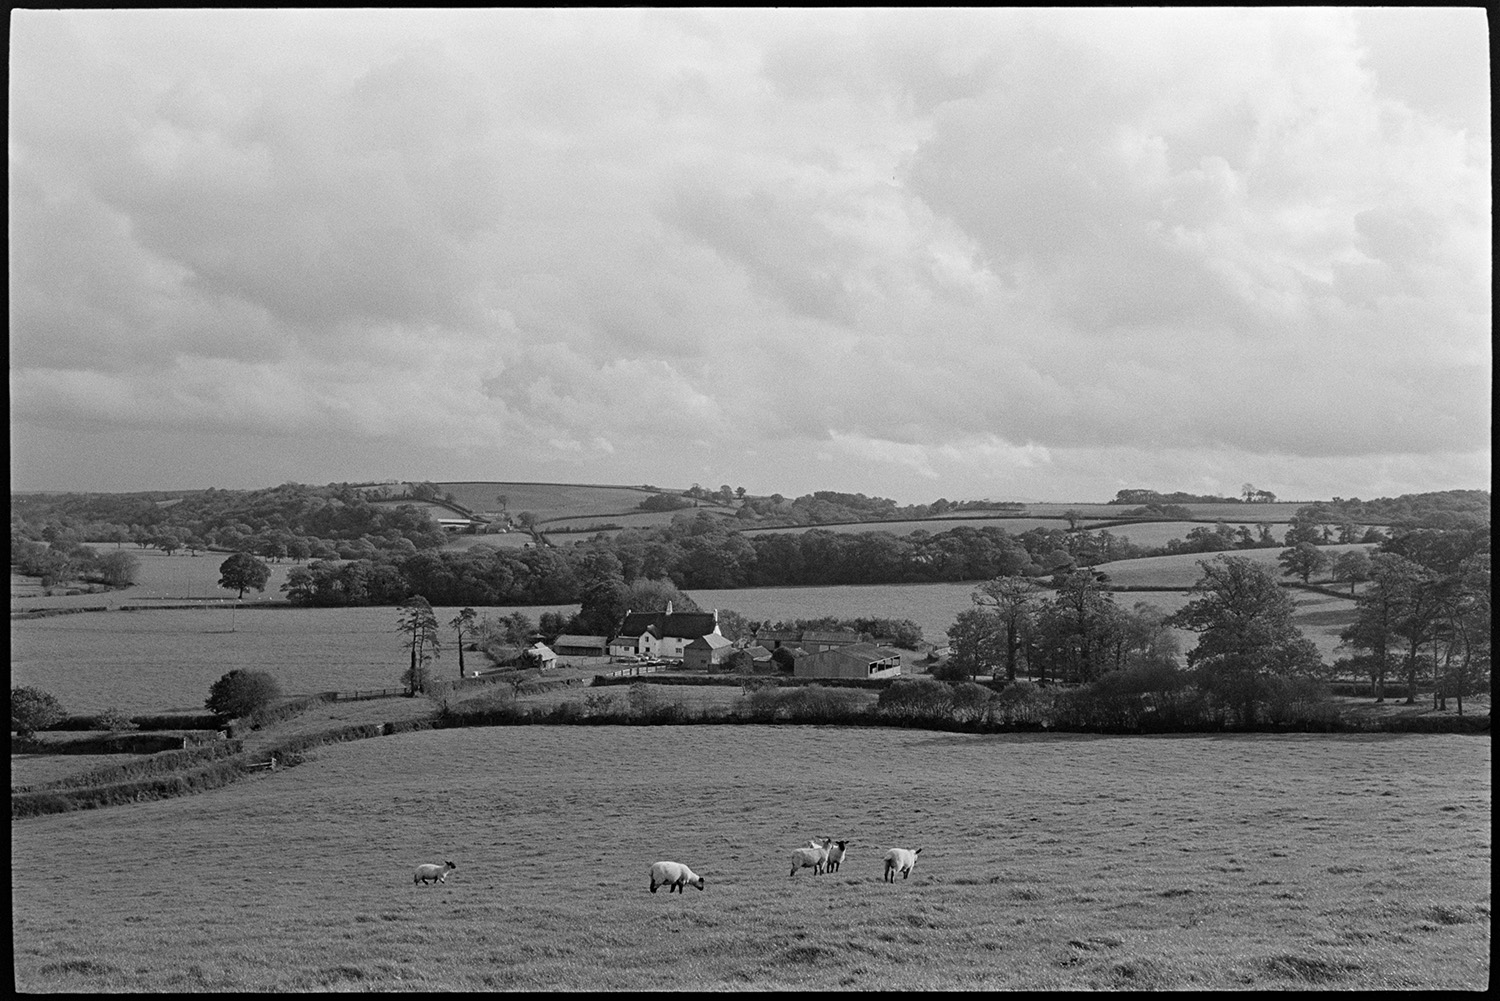 Sheep in field by cob and thatch farmhouse. 
[Sheep grazing in a field at Totleigh Barton, Sheepwash. The cob and thatch farmhouse where the  Arvon Foundation is based is visible in the background surrounded by fields and trees.]